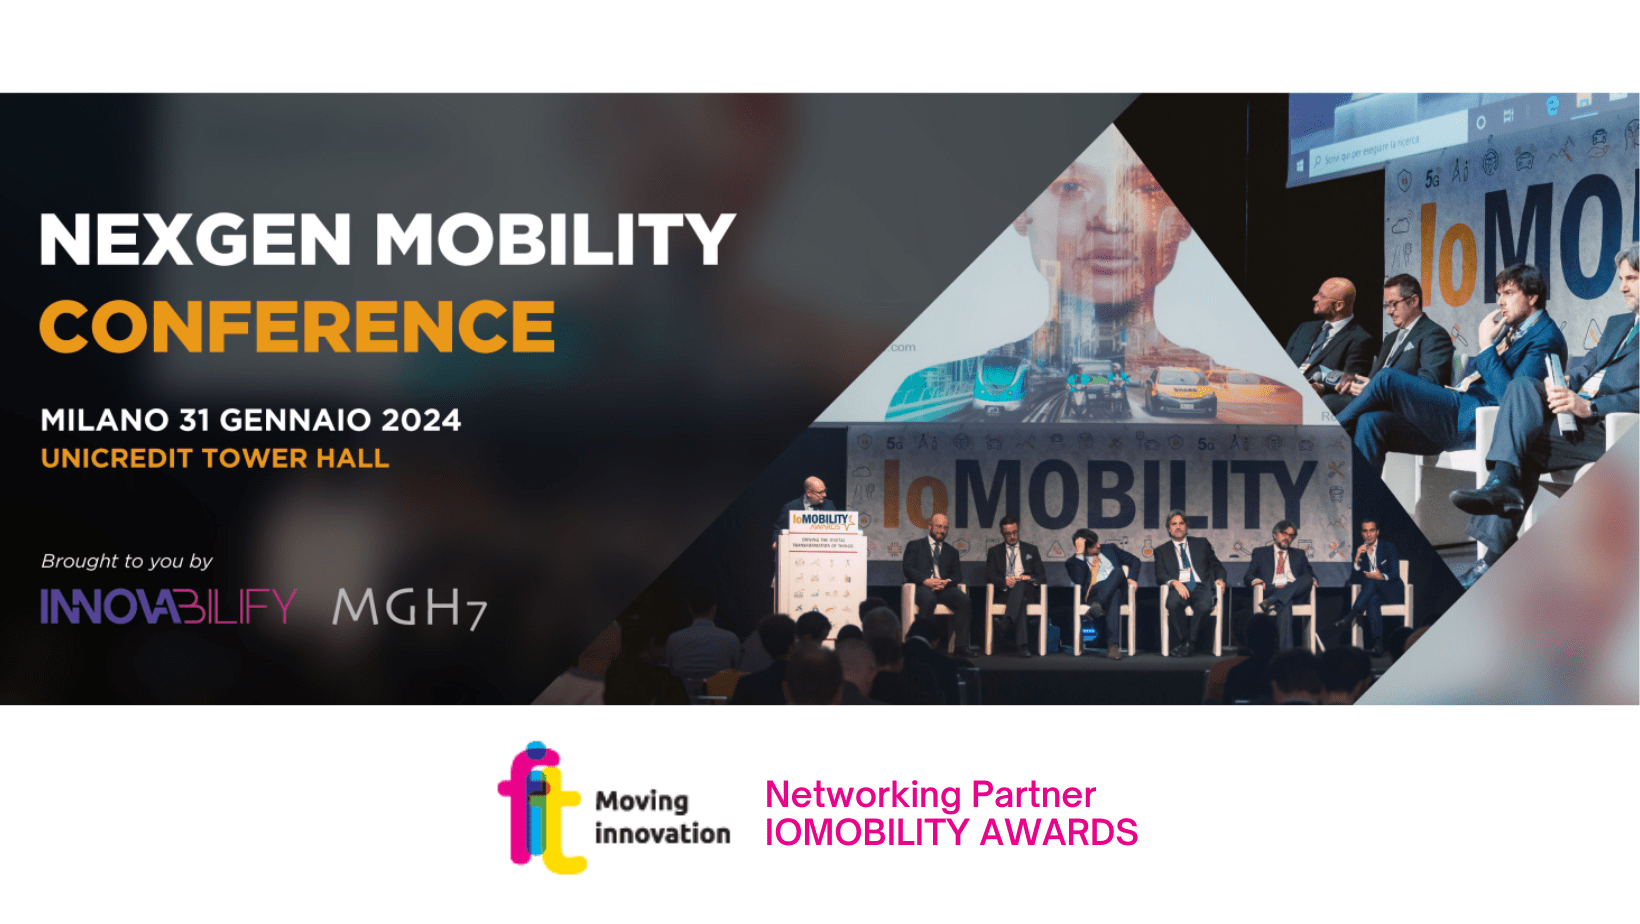 NEXGEN MOBILITY CONFERENCE